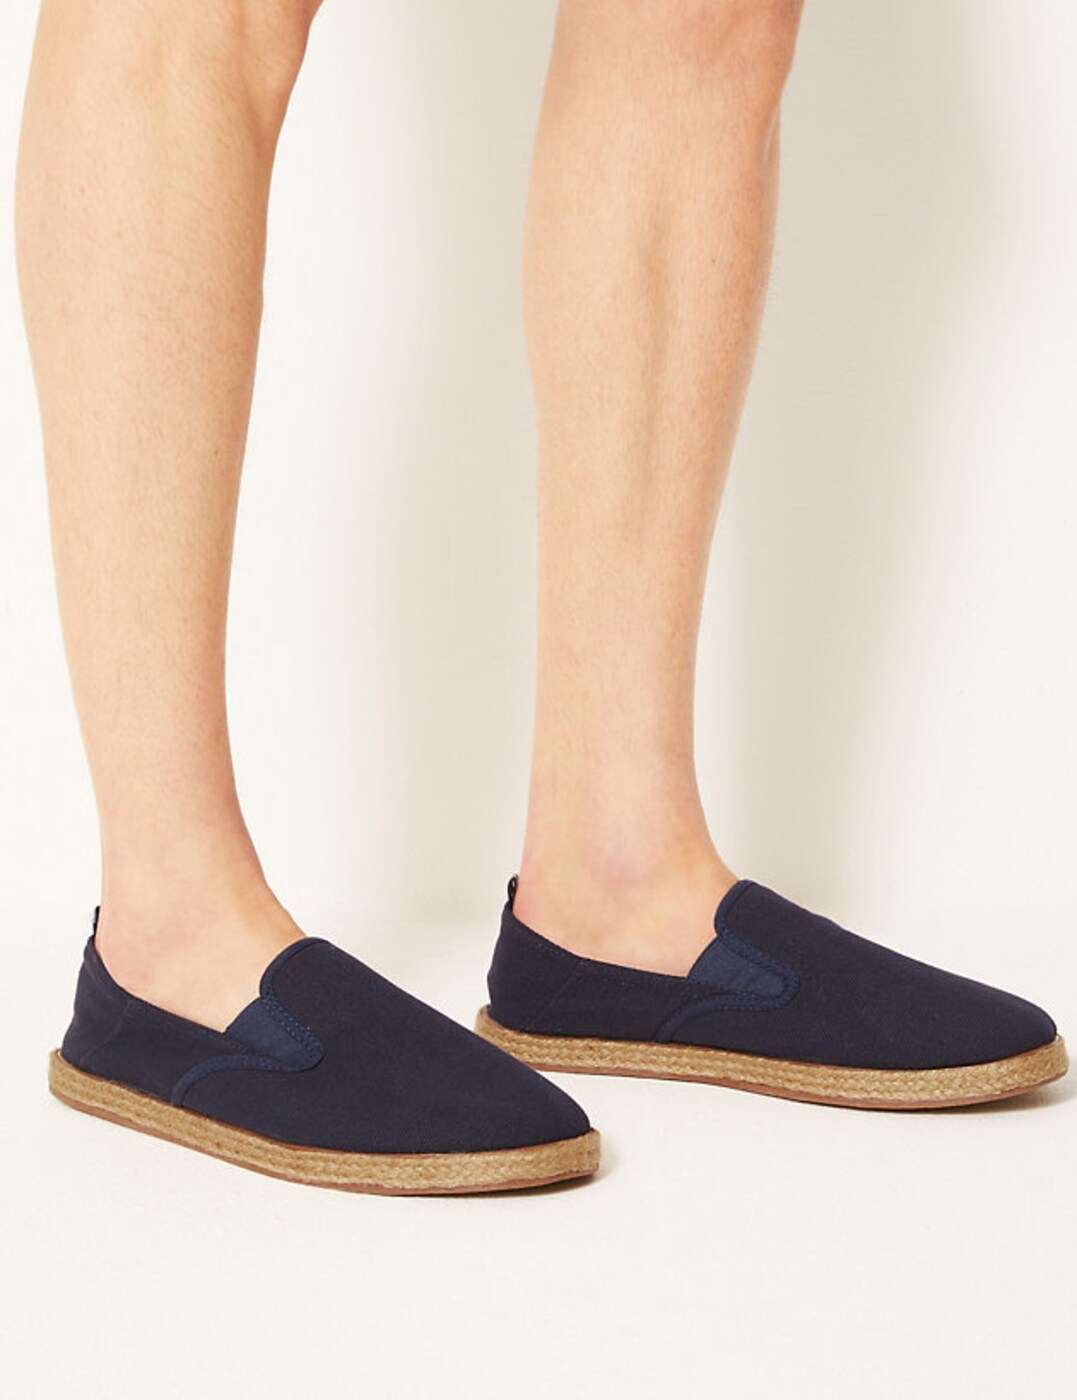 marks and spencer mens deck shoes